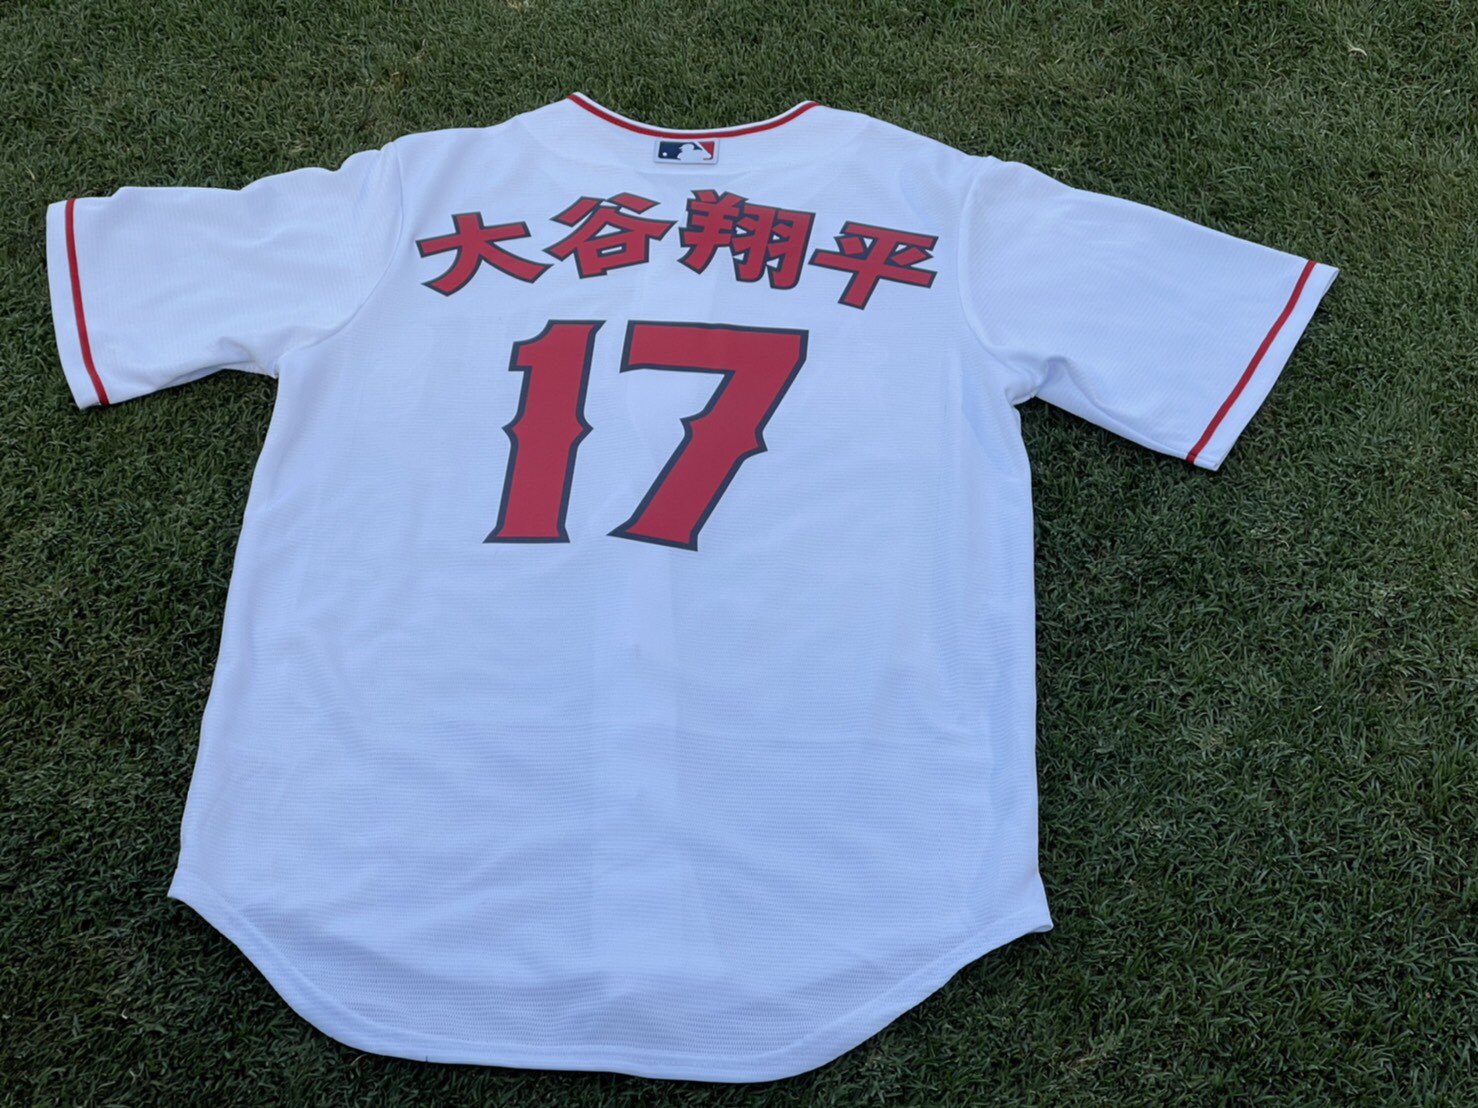 Ohtani-san on X: No one is surprised that the Ohtani Kanji jerseys sold  out. / X